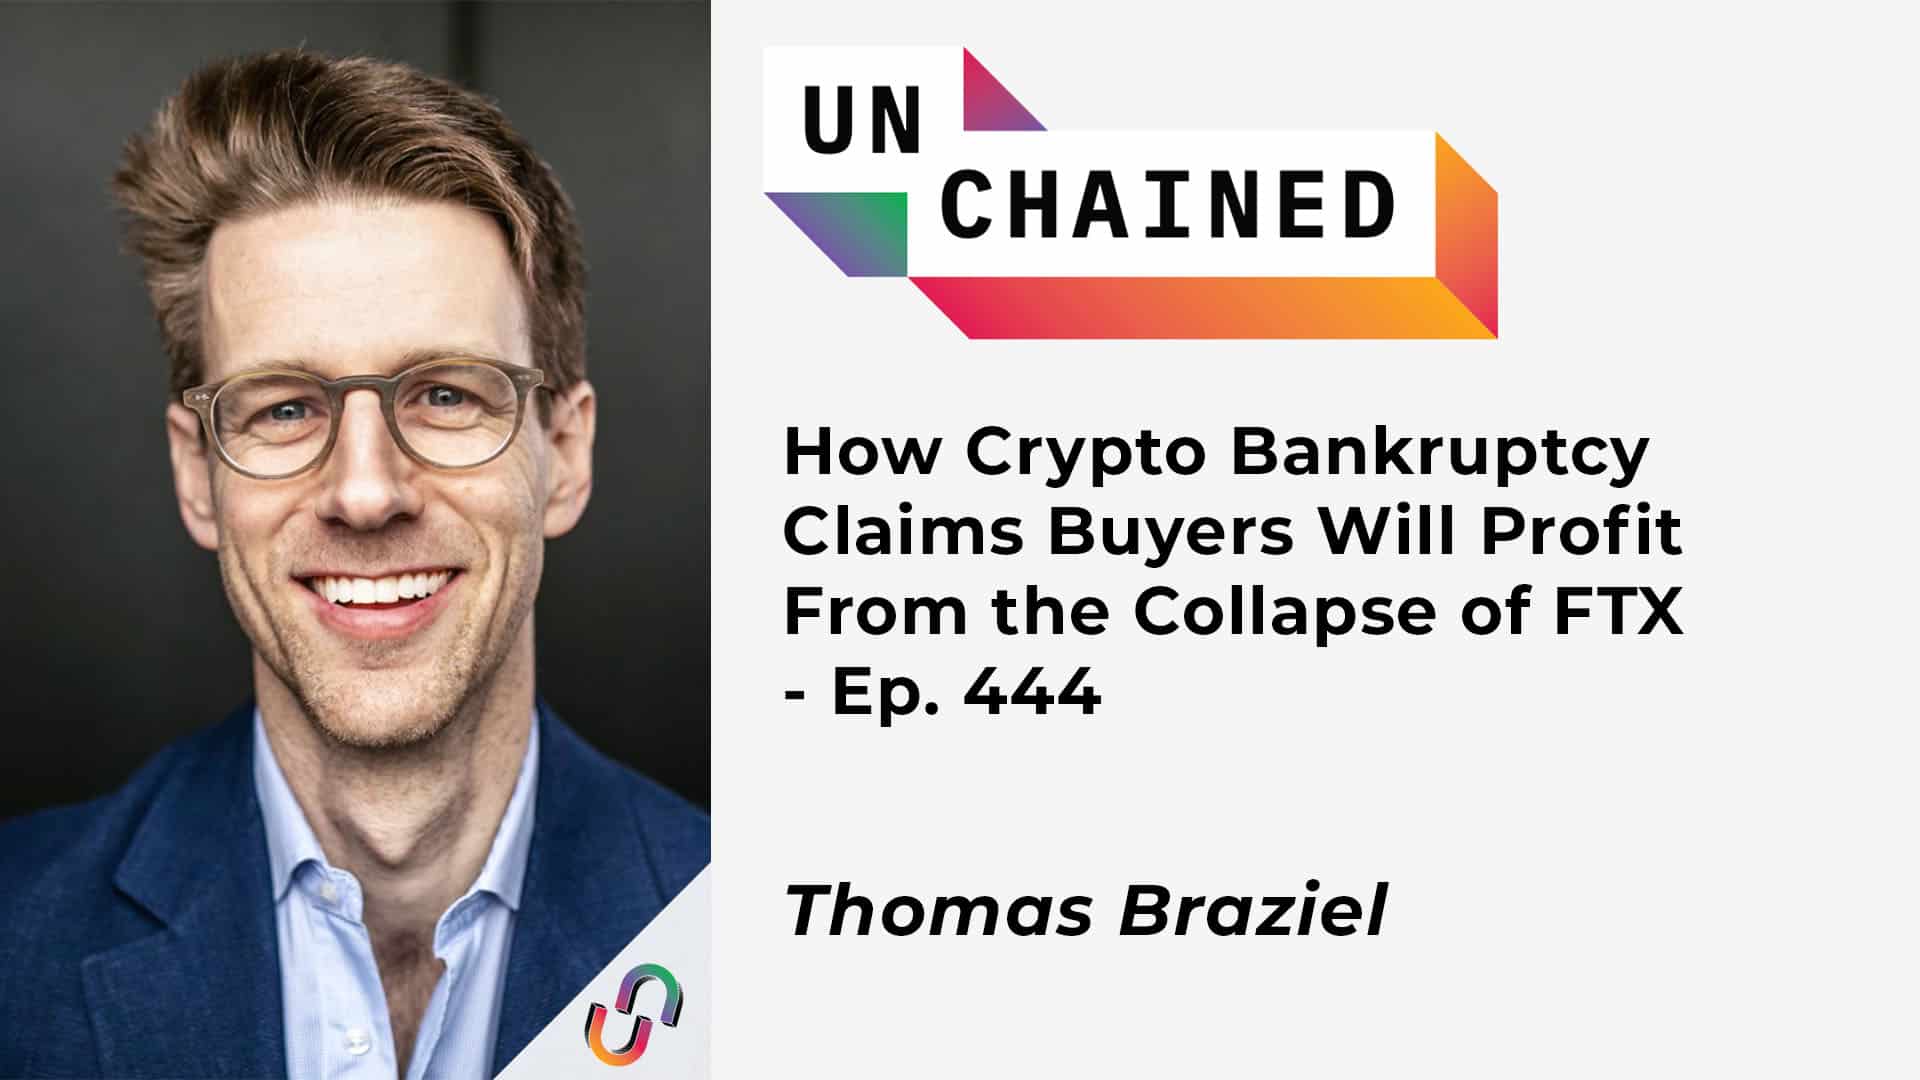 How Crypto Bankruptcy Claims Buyers Will Profit From the Collapse of FTX - Ep. 444